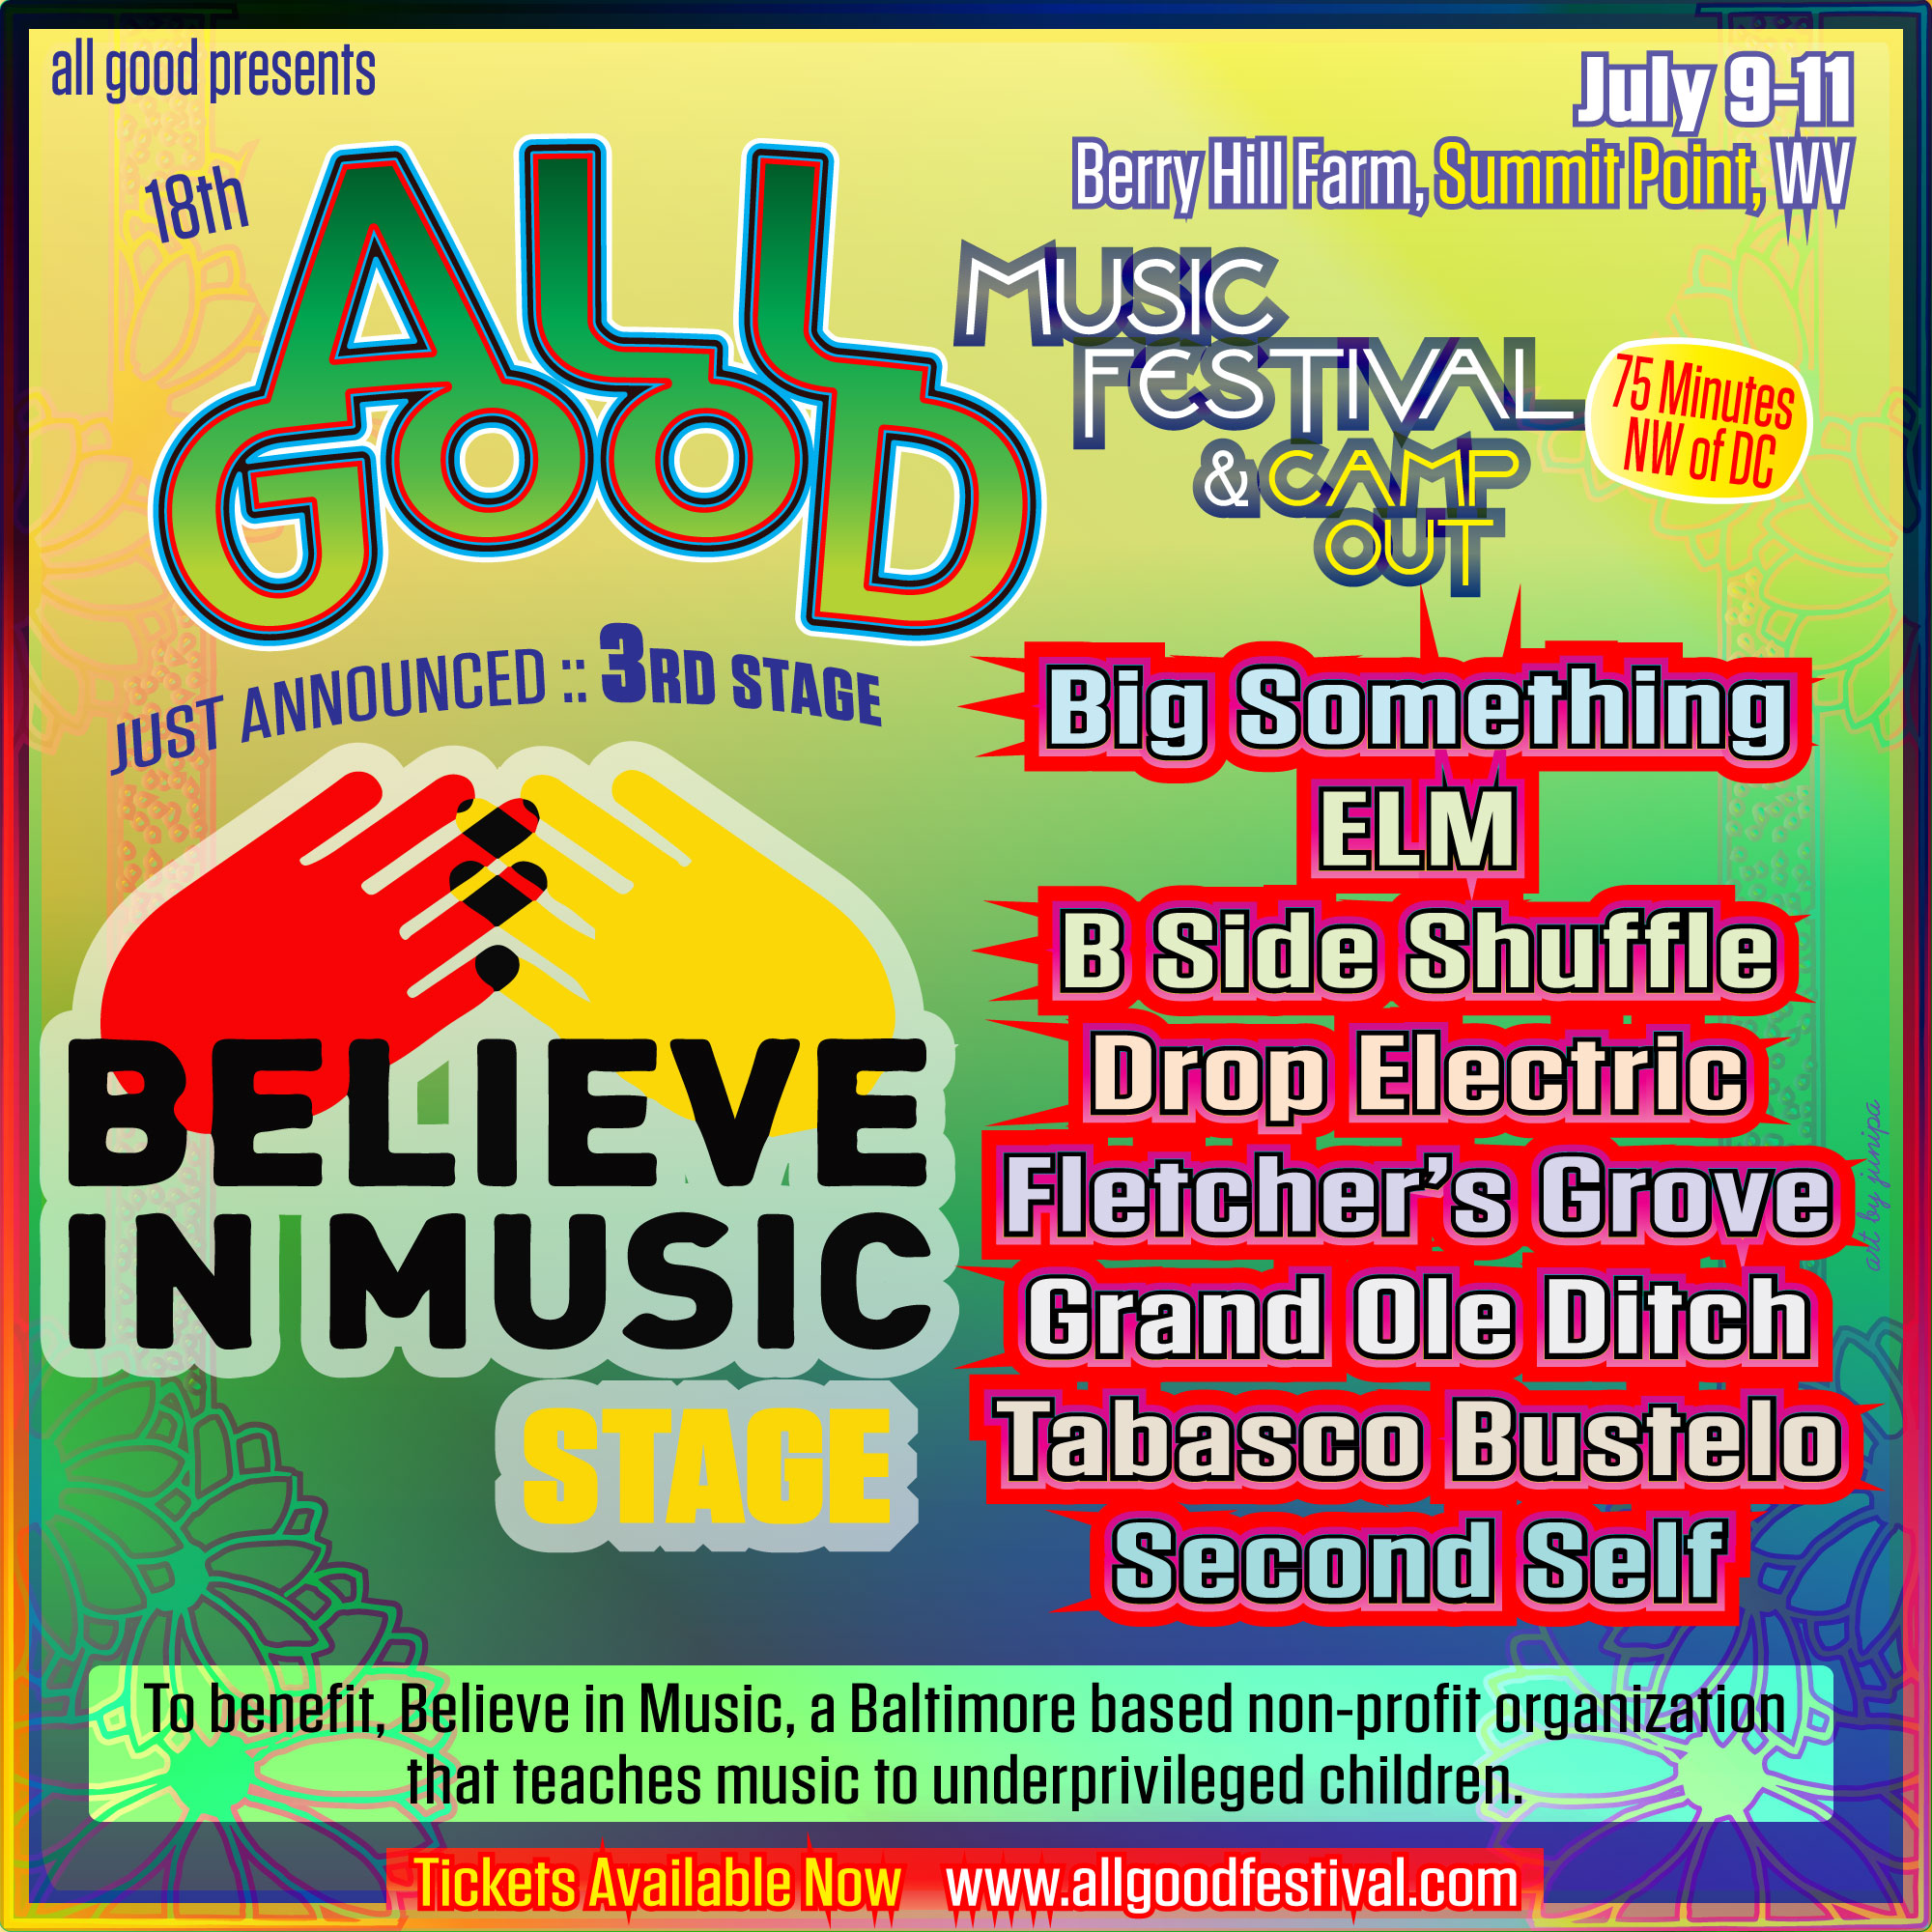 All Good Festival Announces ‘Believe in Music’ Stage; Supports Music Programs for Inner City Children